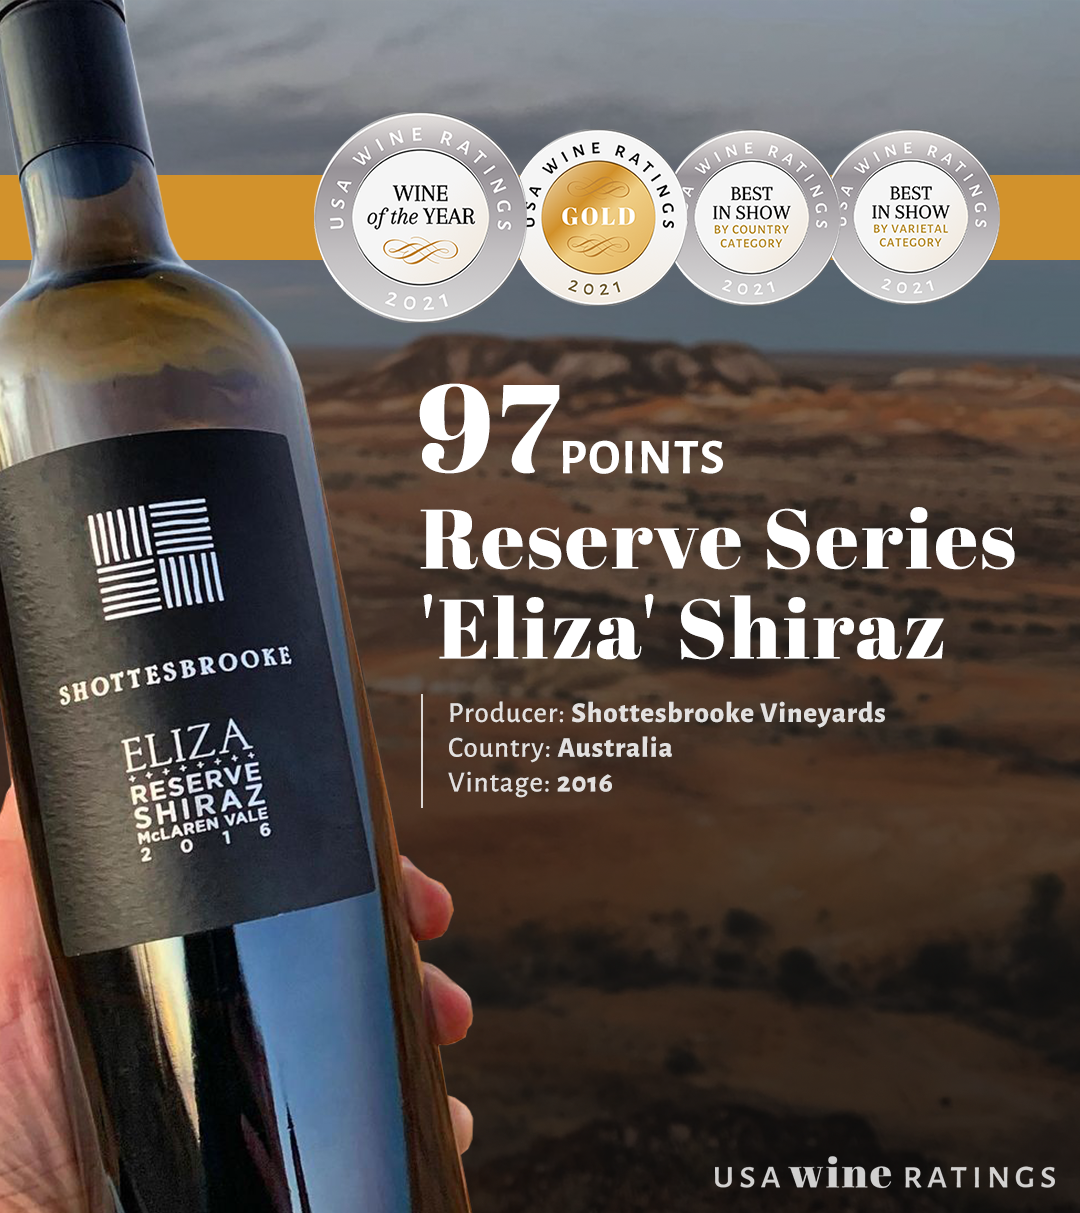 Shottesbrooke Reserve Series 'Eliza' Shiraz gets the best wine award with 97 points